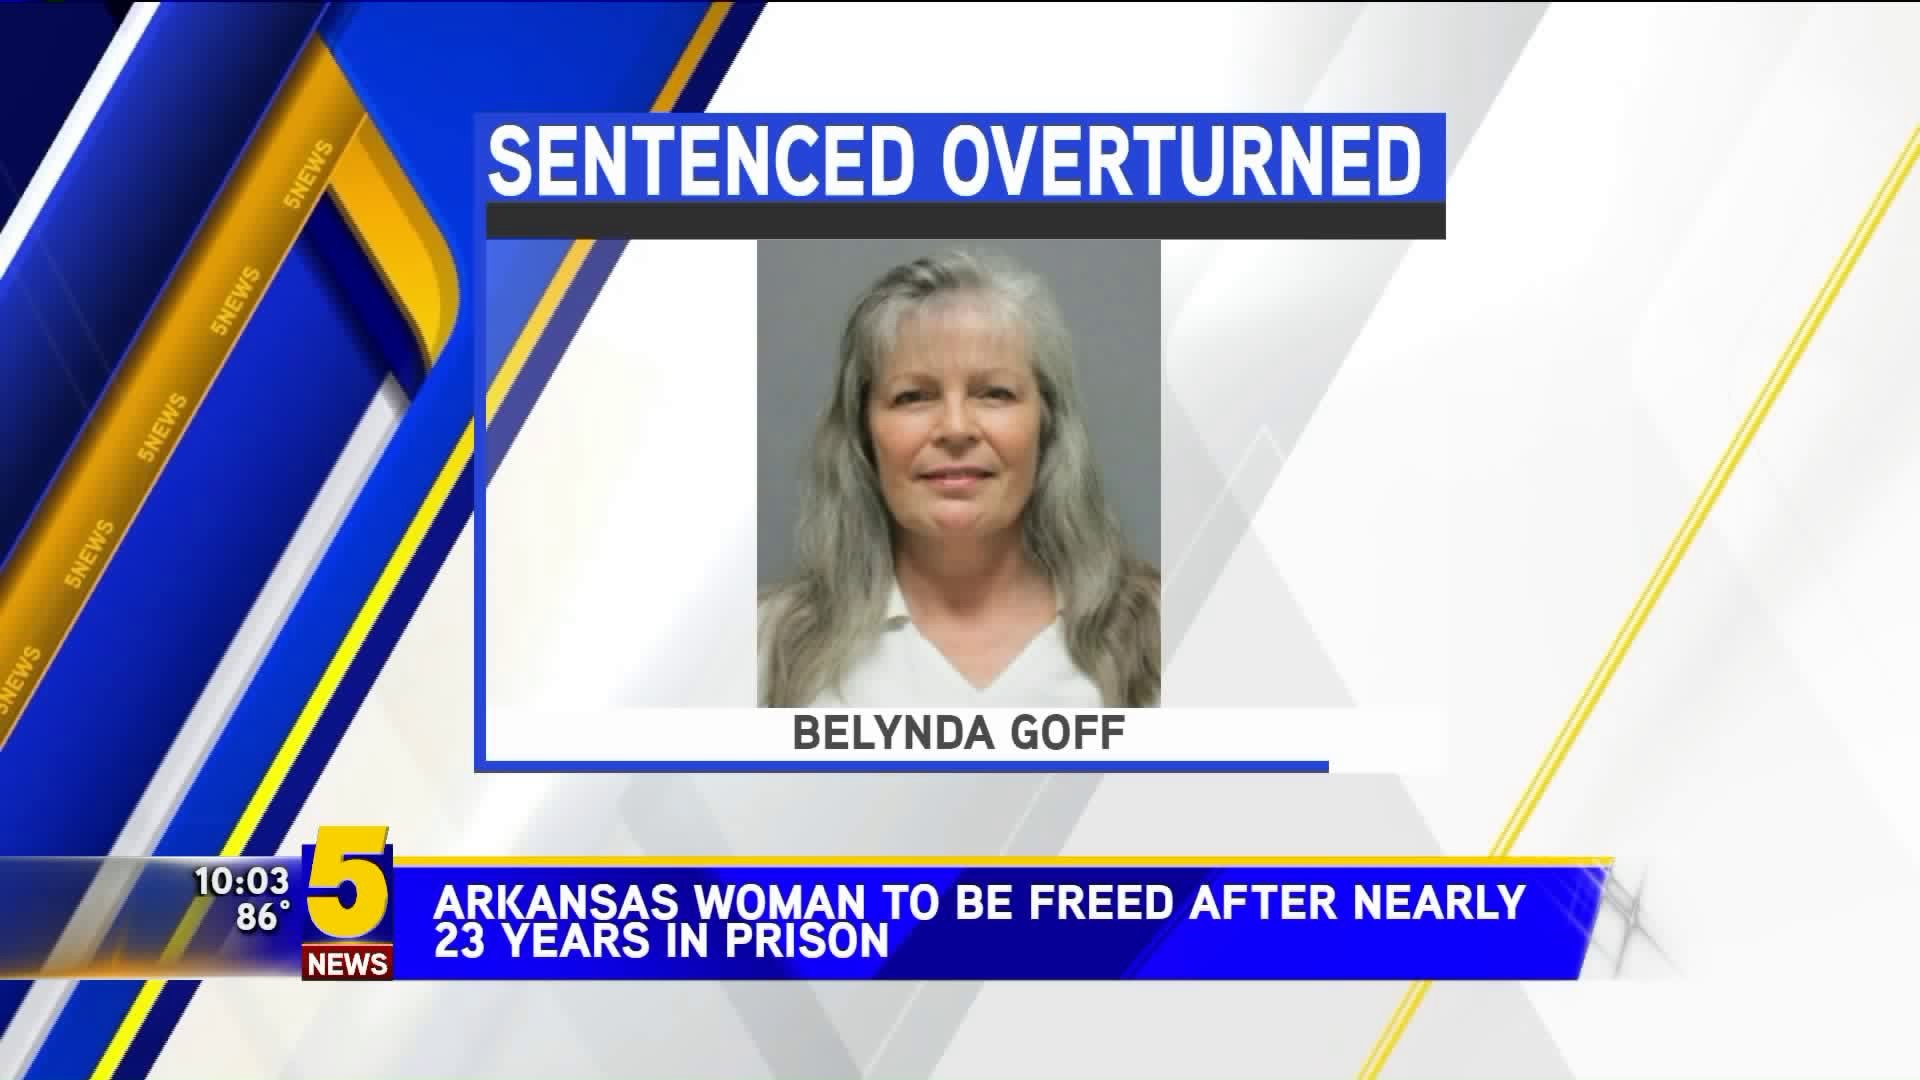 Arkansas Woman to be Freed After Nearly 23 Years in Prison